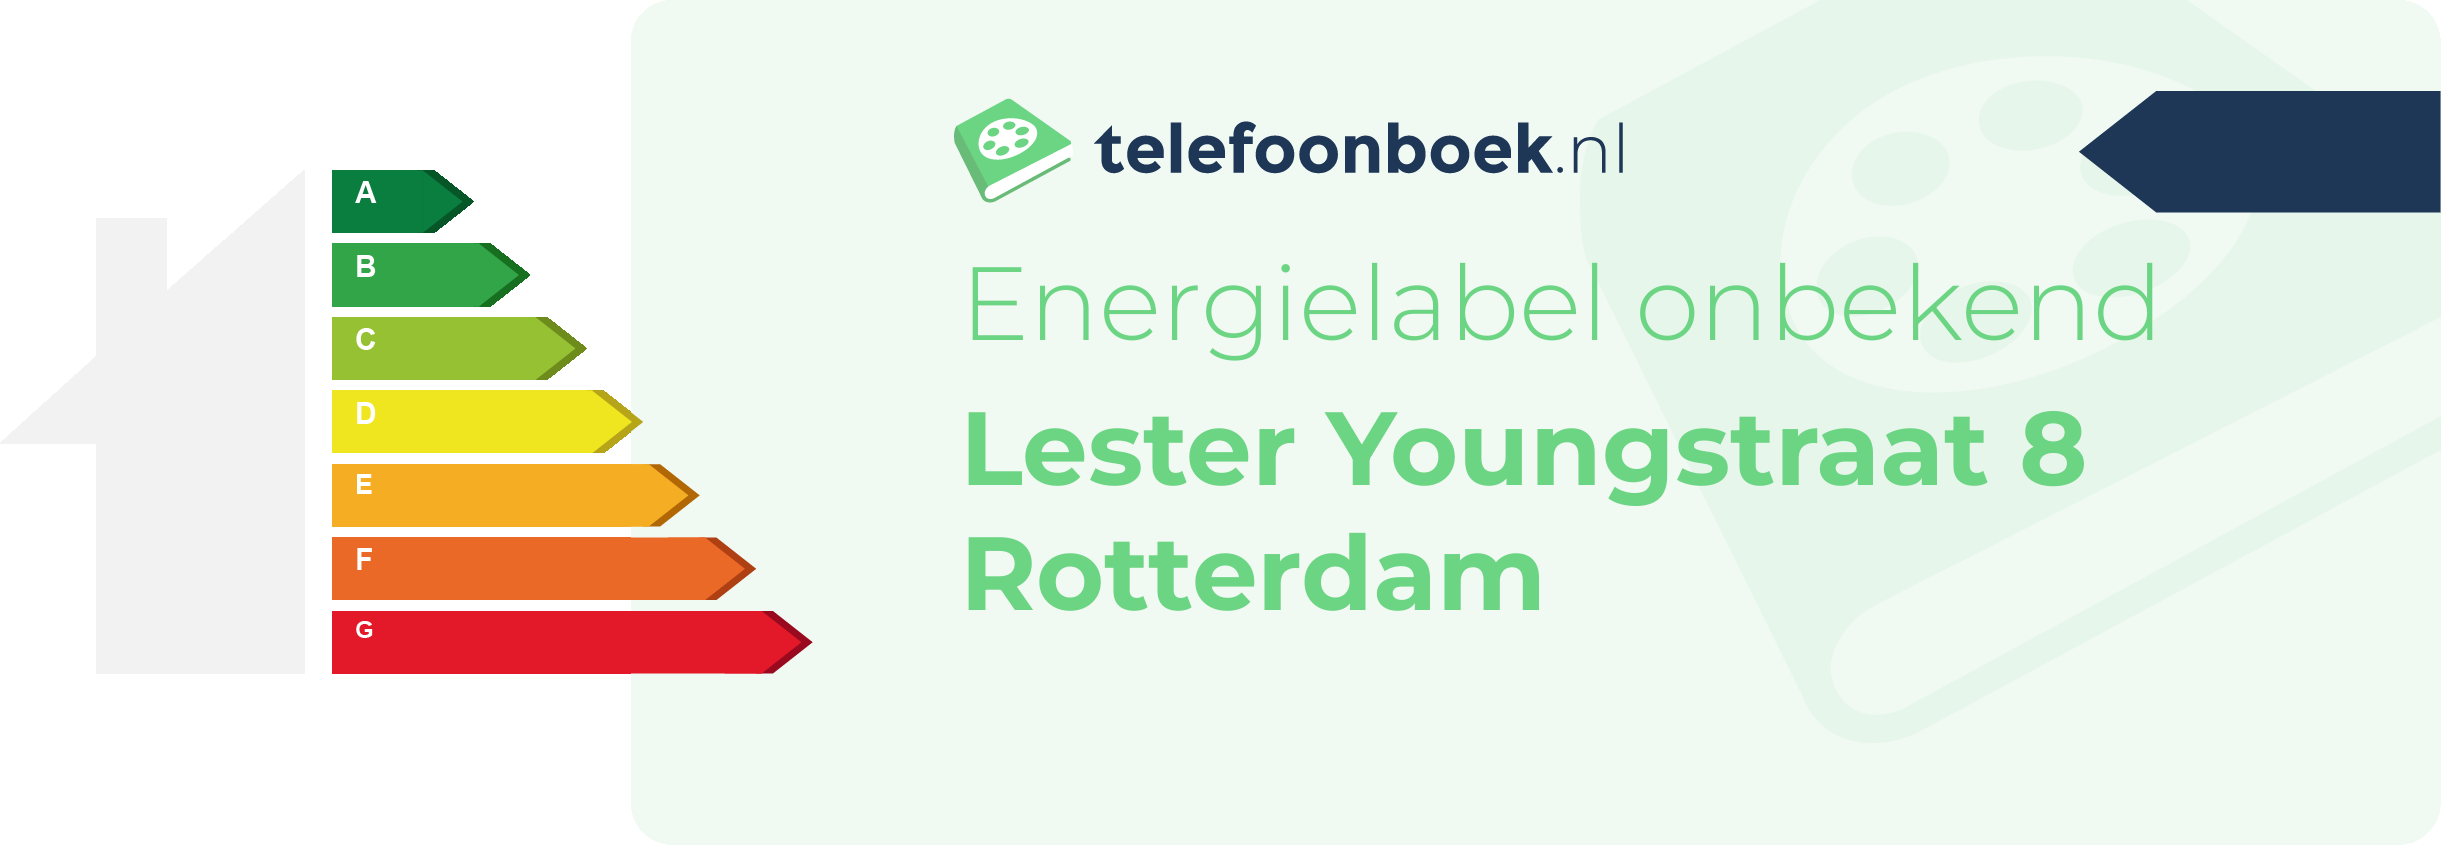 Energielabel Lester Youngstraat 8 Rotterdam